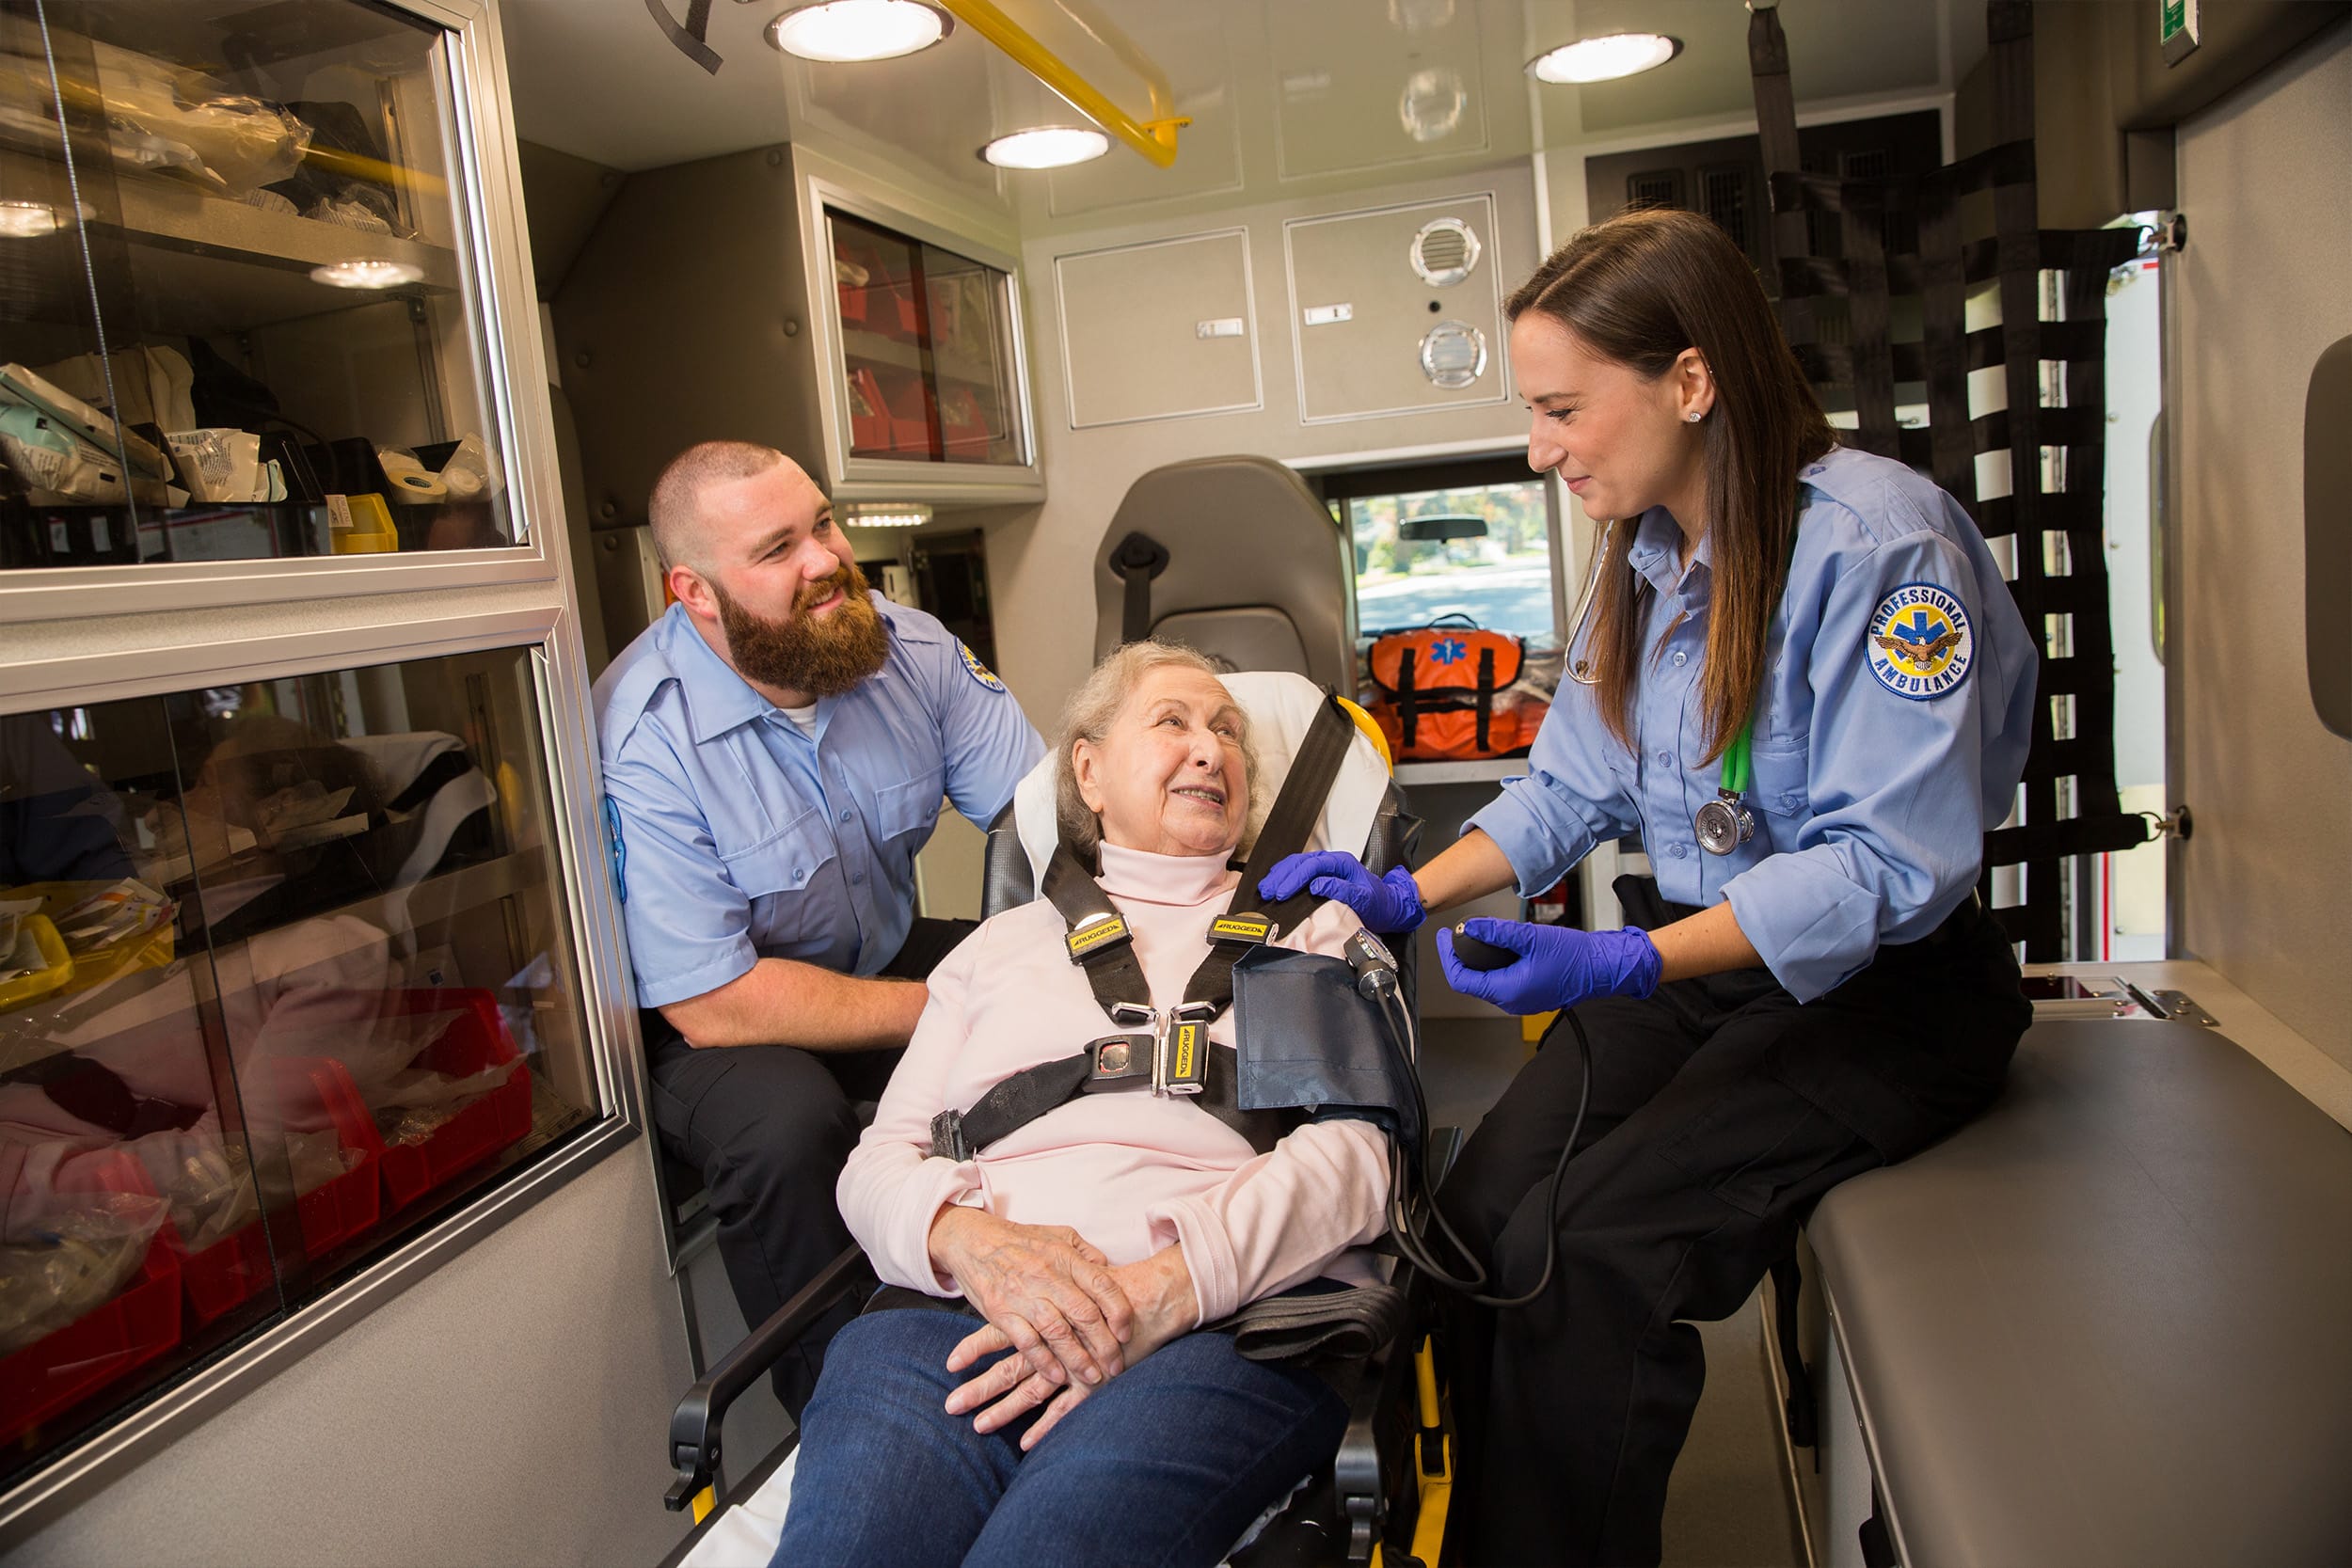 EMT laughing with women in back of Ambulance